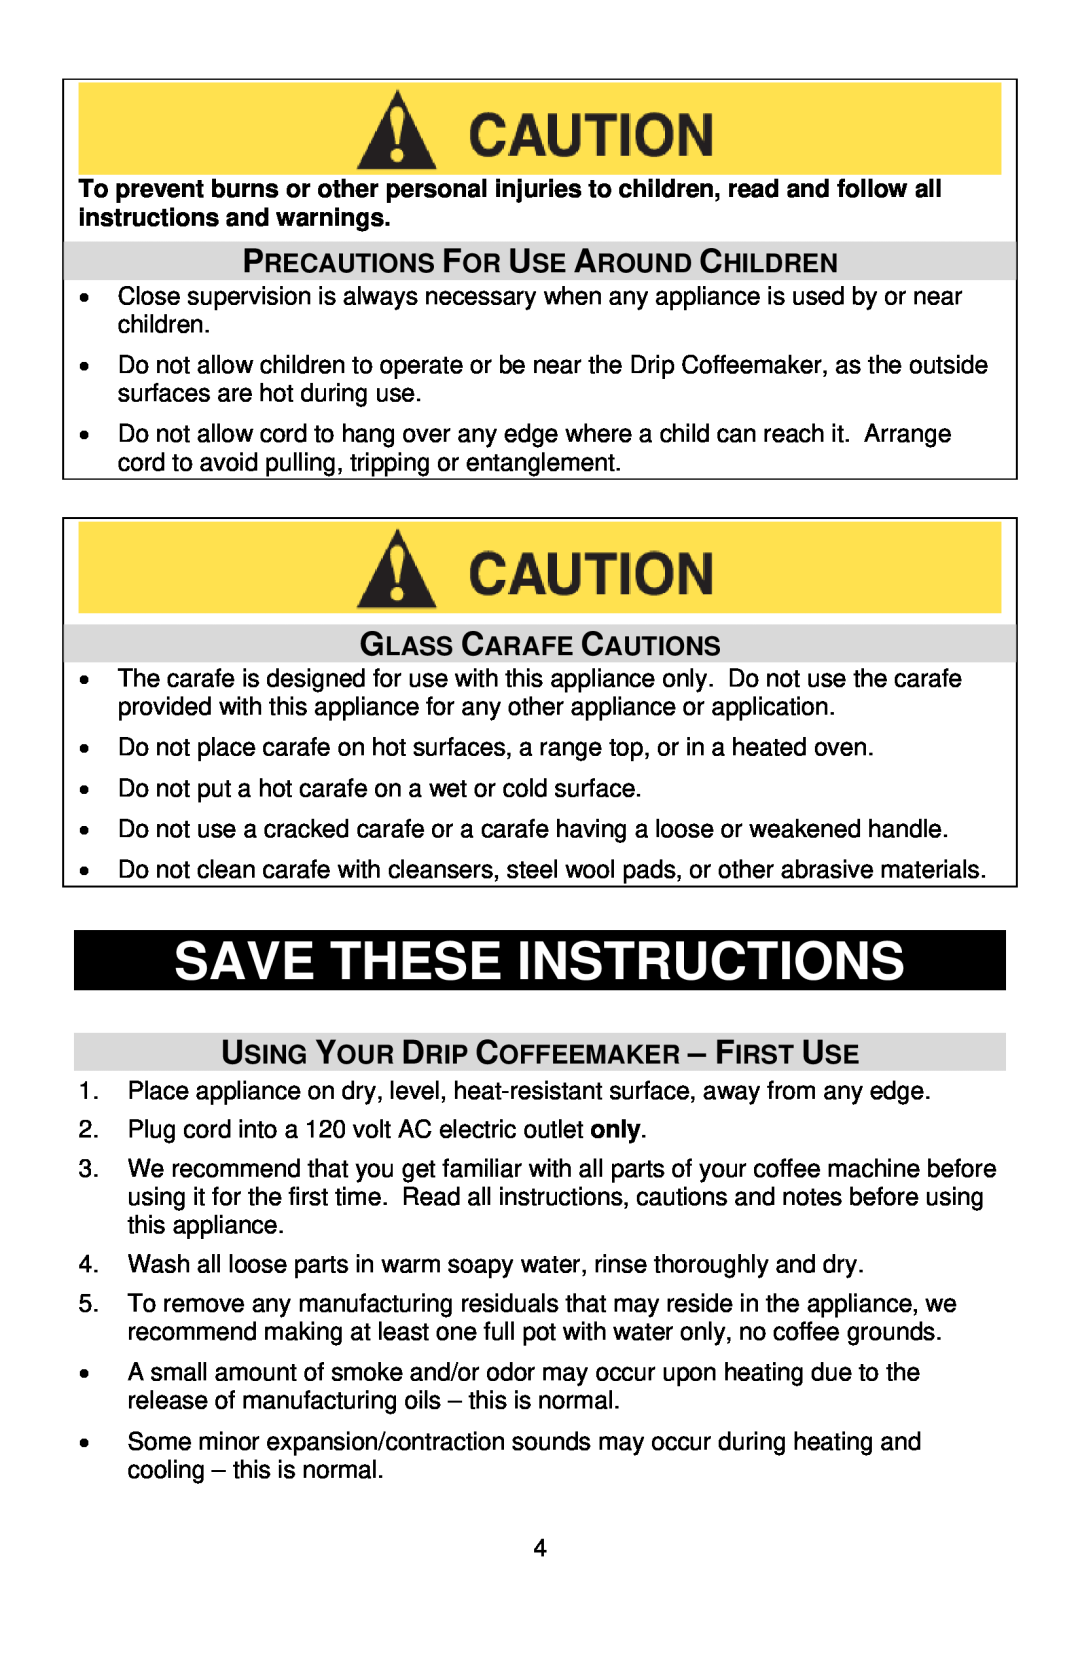 West Bend QUIKSERVE instruction manual Save These Instructions, Precautions For Use Around Children, Glass Carafe Cautions 